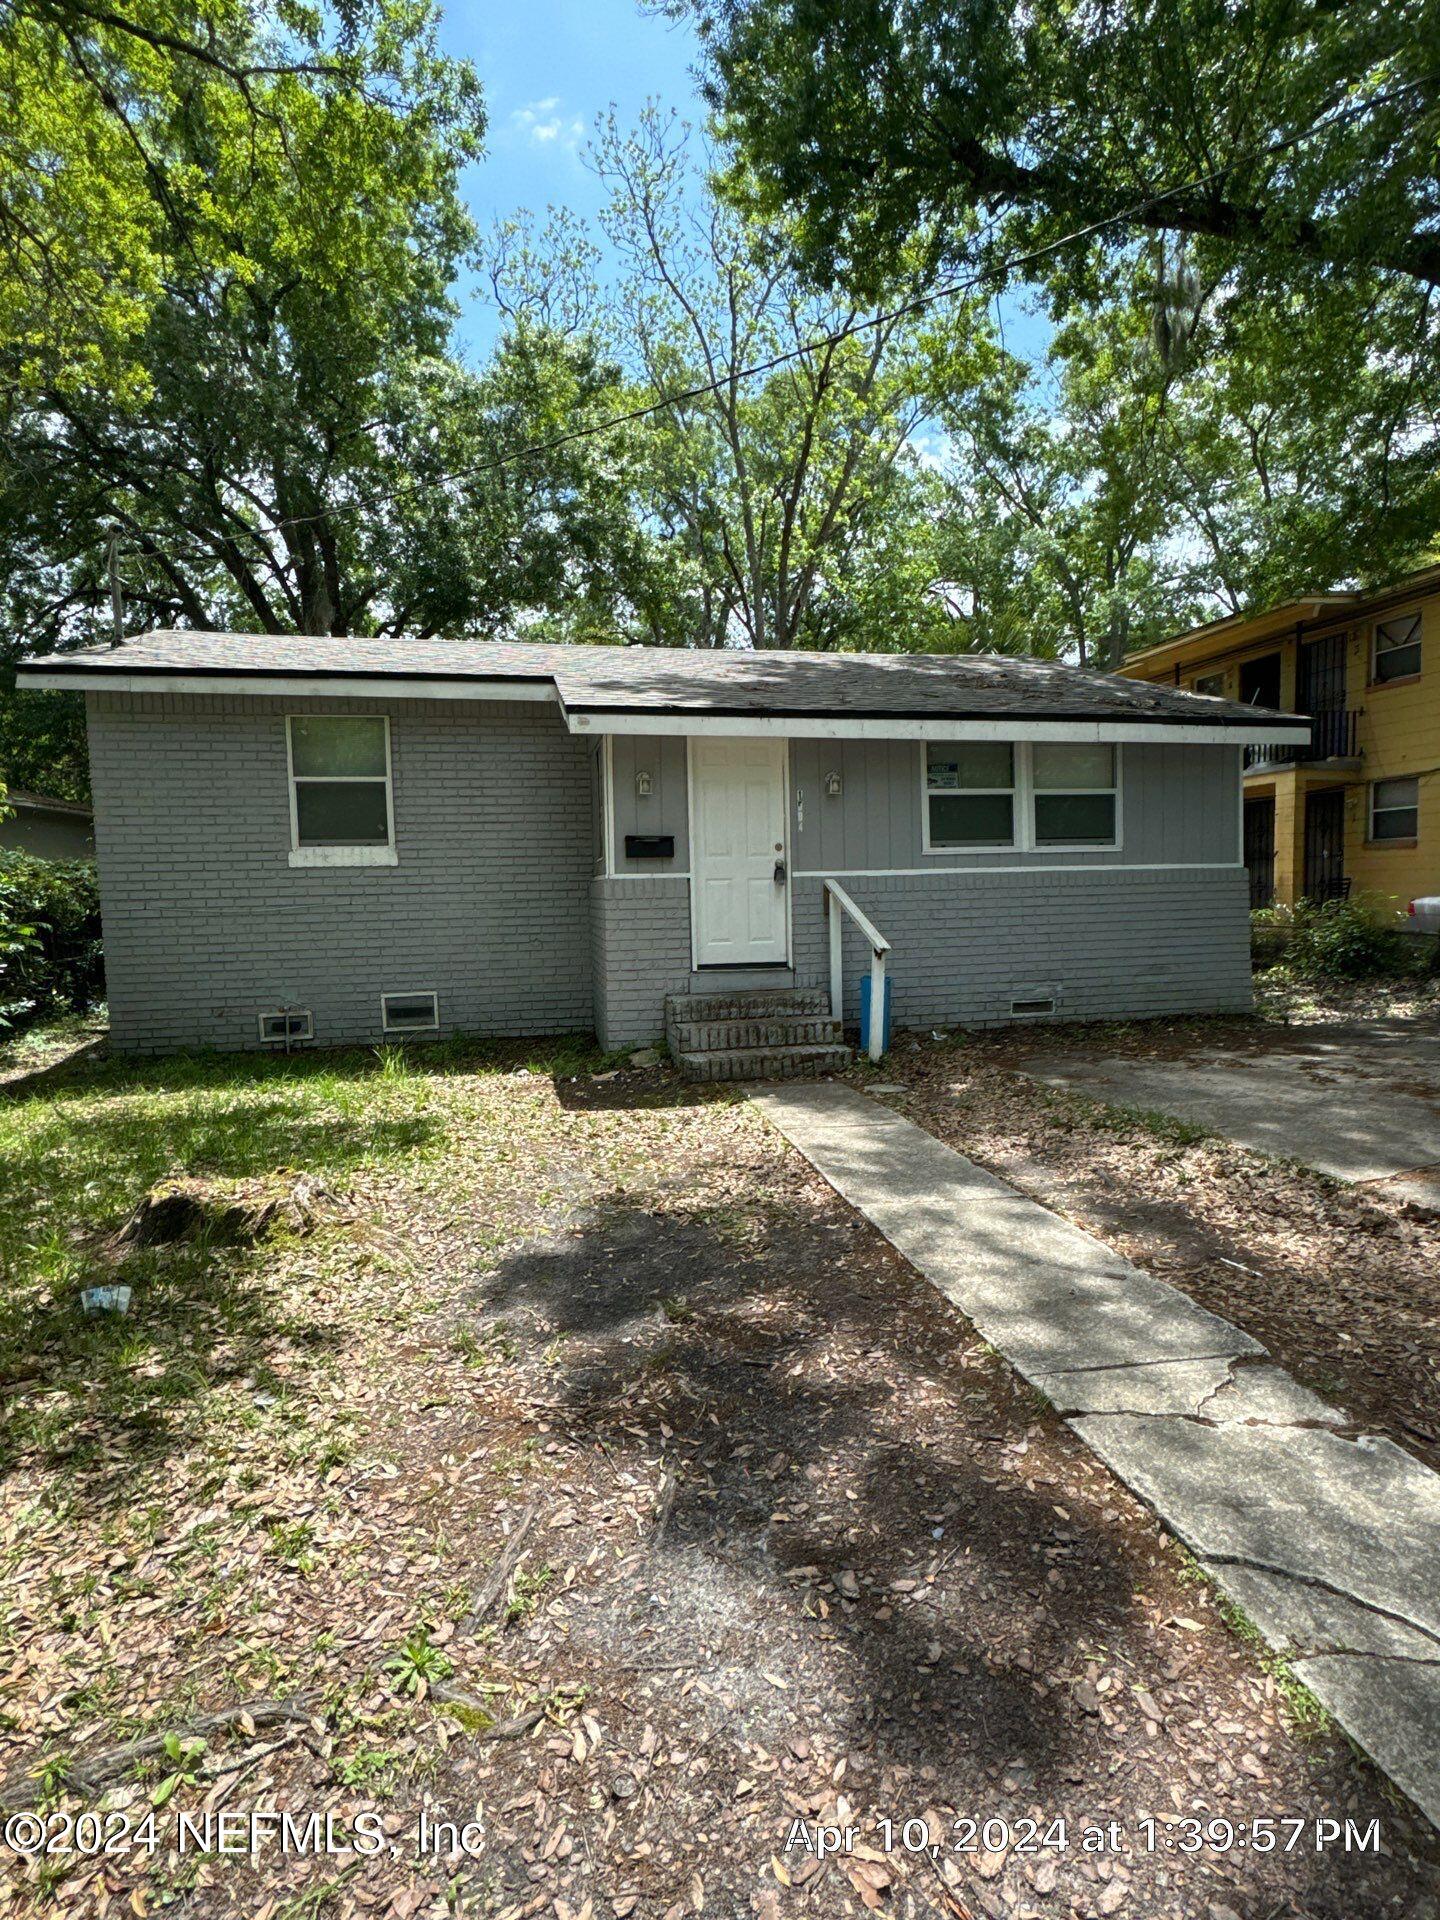 Jacksonville, FL home for sale located at 1504 W 27th Street, Jacksonville, FL 32209